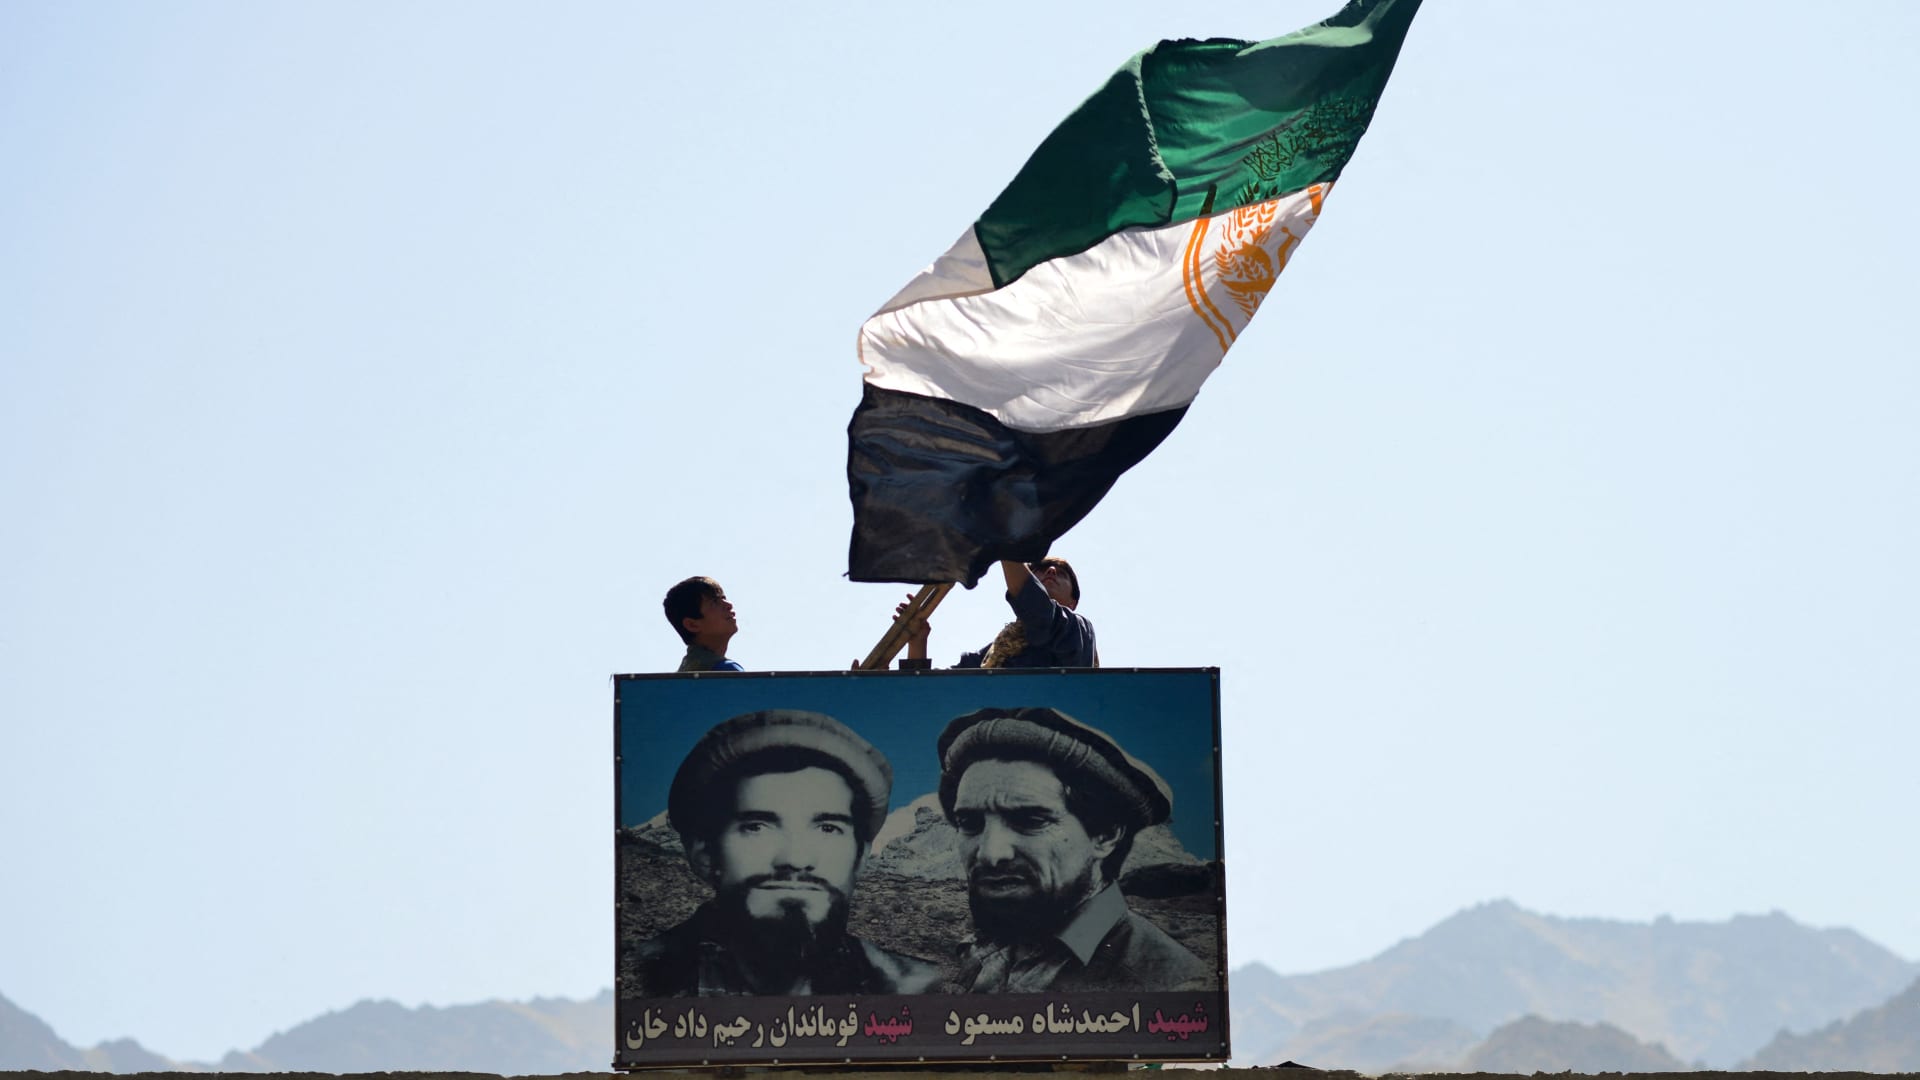 Afghan men wave a flag above the portrait of late Afghan commander Ahmad Shah Massoud (R) in Paryan district of Panjshir province on August 23, 2021, as the Taliban said their fighters had surrounded resistance forces holed up in the valley, but were looking to negotiate rather than take the fight to them.